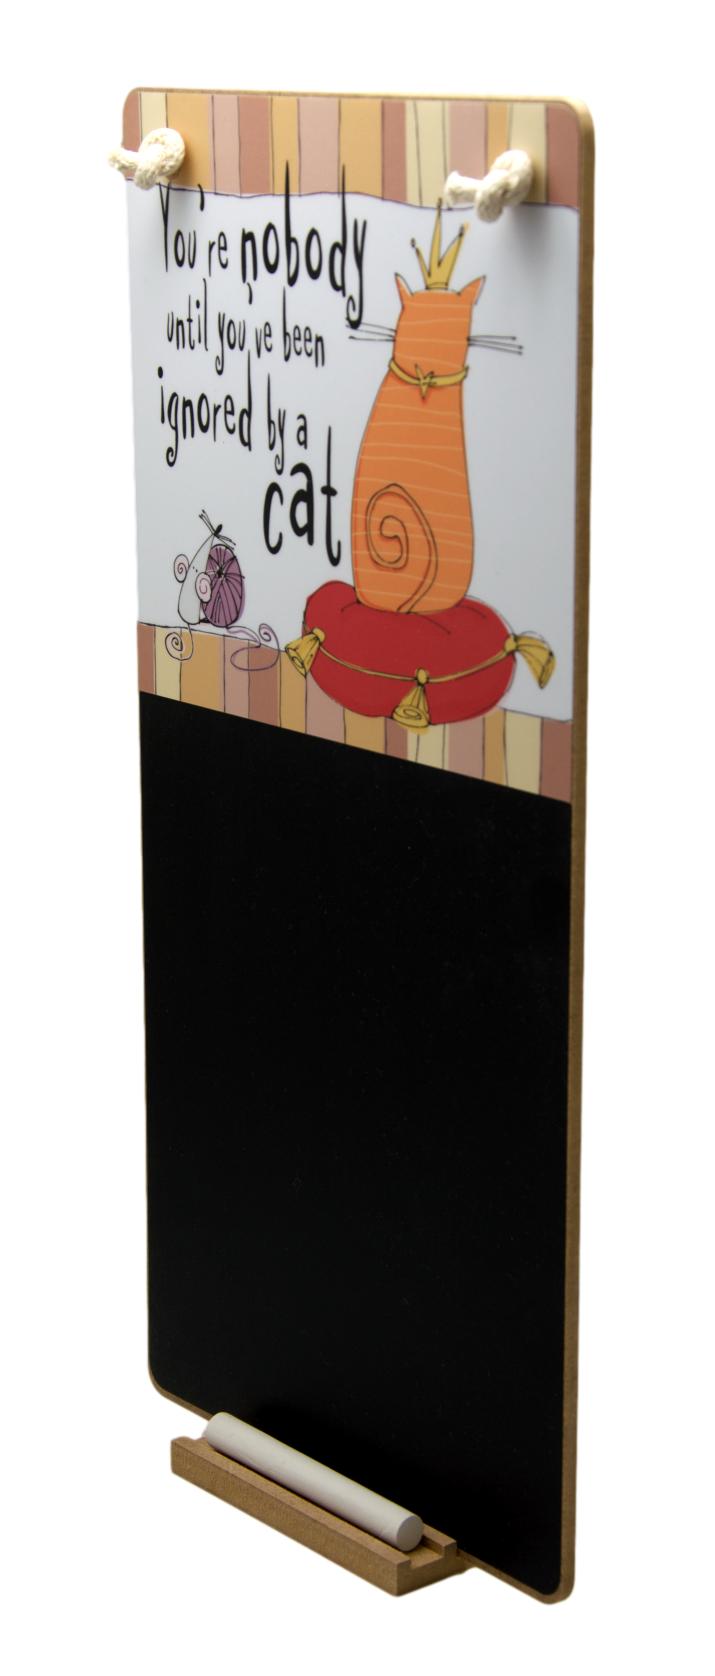 Ignored by the Cat Chalkboard & Chalk with Matching Coasters - Gift Set